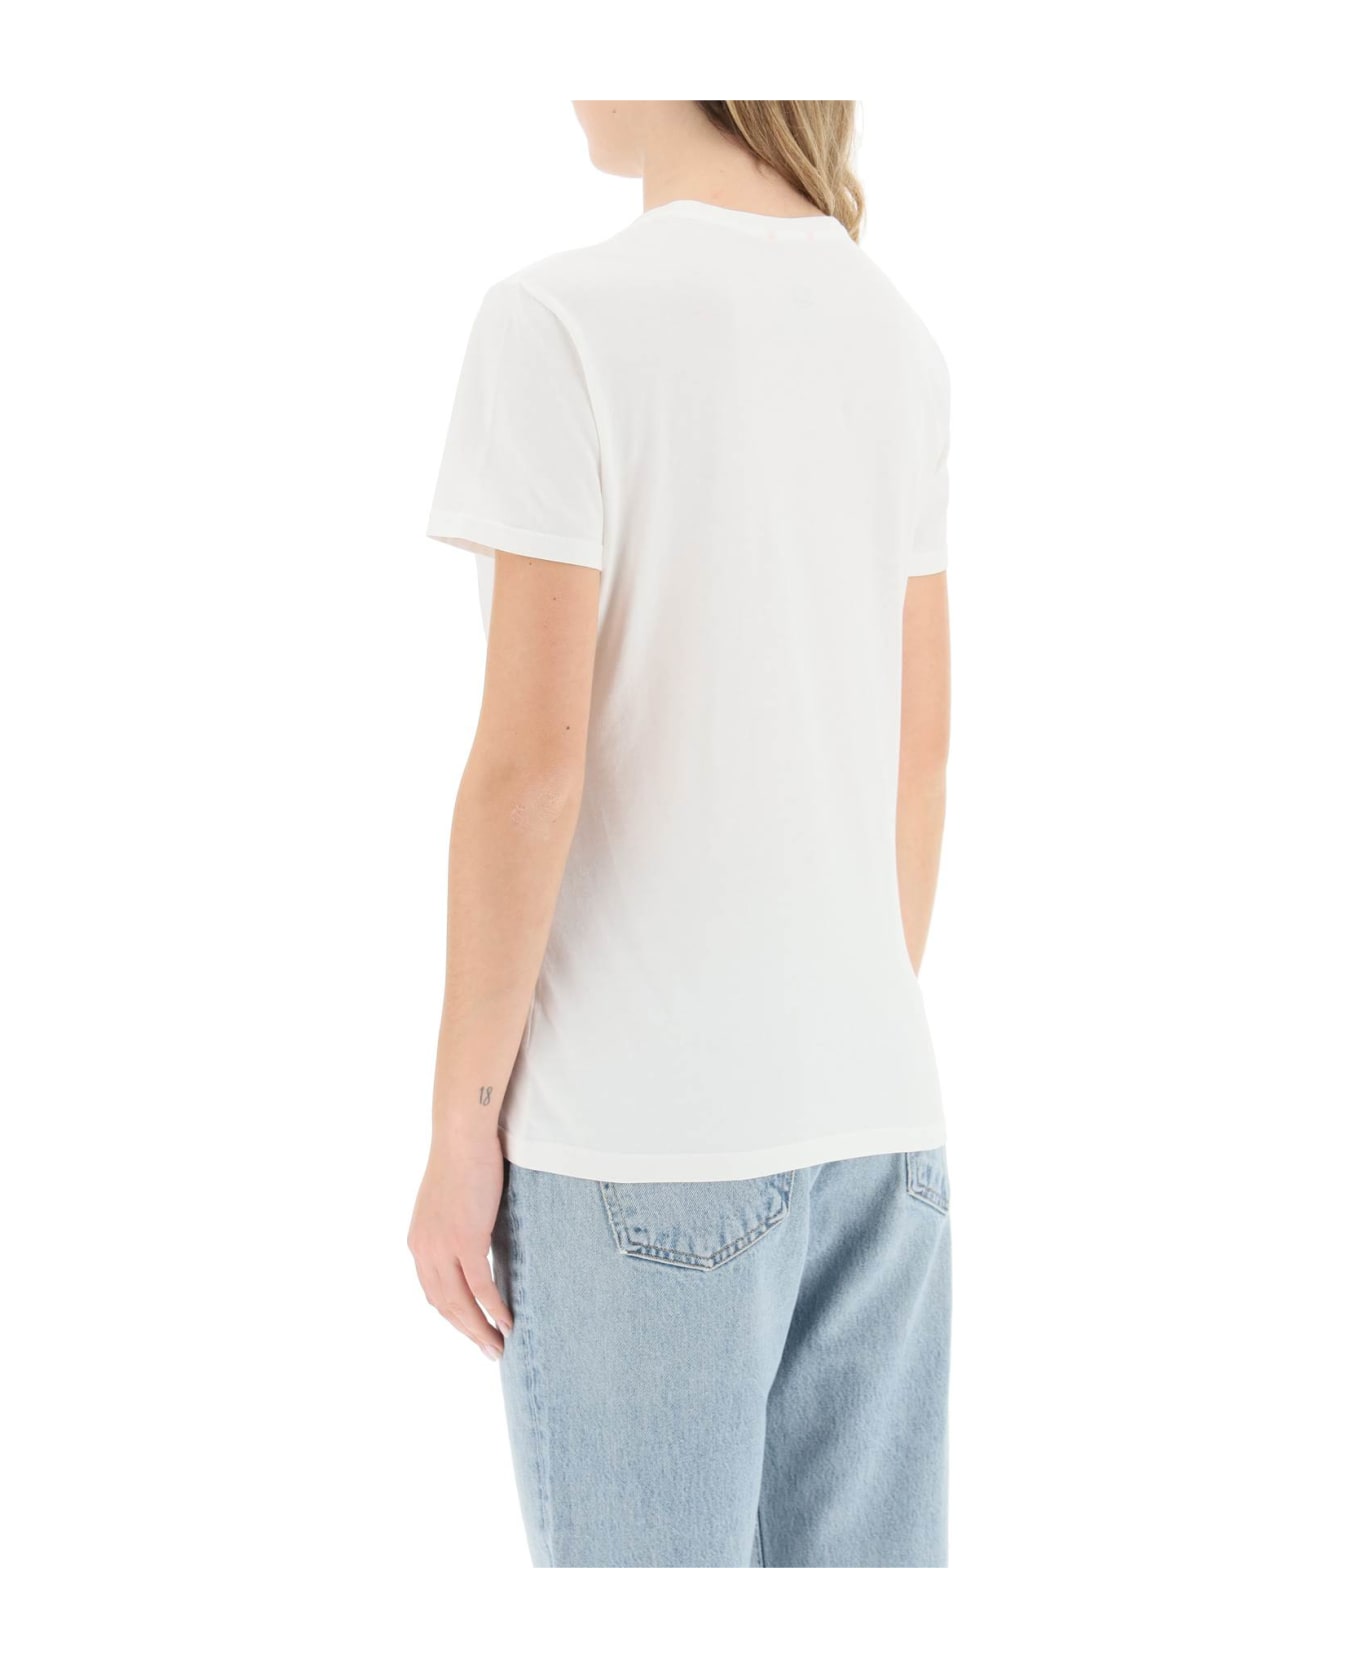 Parajumpers 'box' Slim Fit Cotton T-shirt - OFF-WHITE (White) Tシャツ